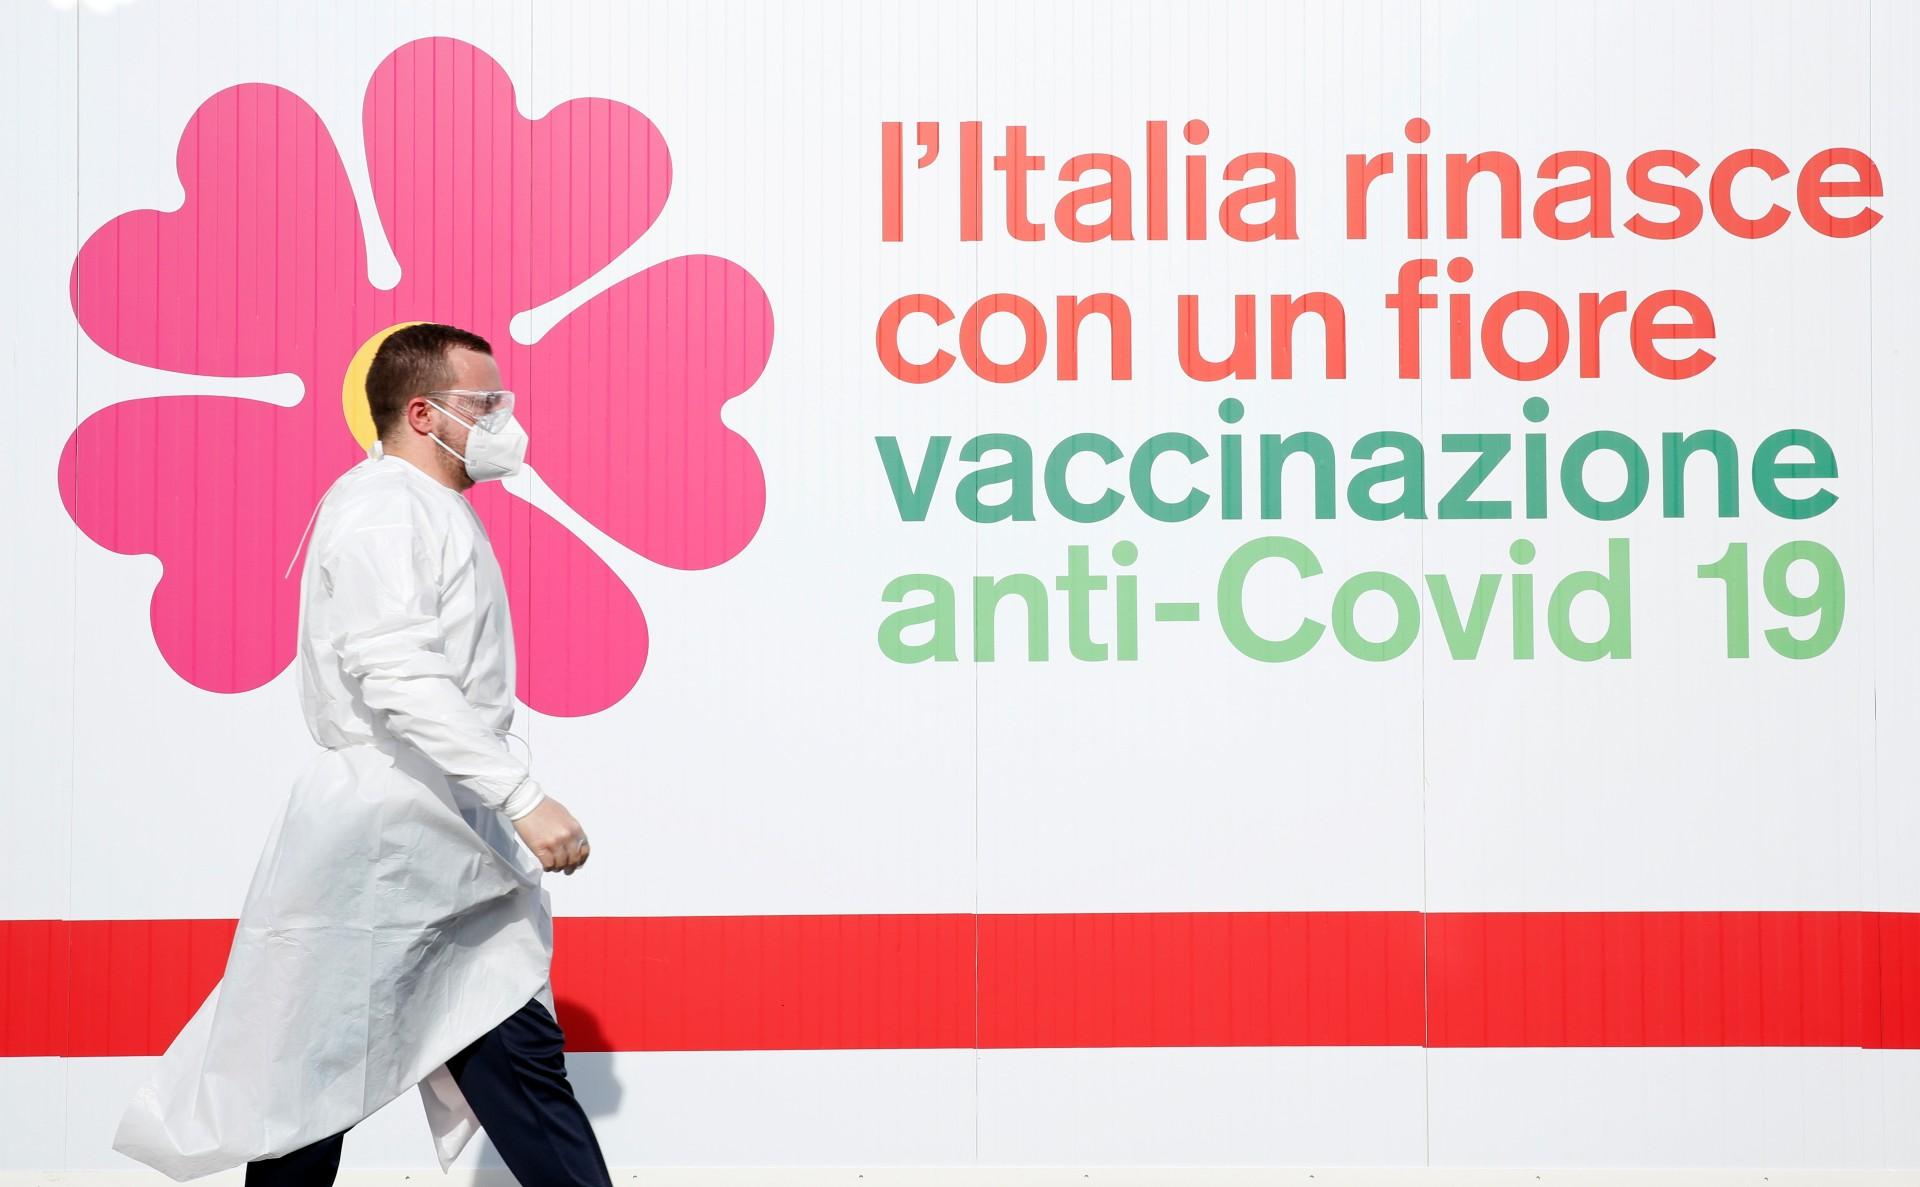 A man walks outside a tent during preparations to turn the long-term car park at Fiumicino airport into a coronavirus disease vaccination center in Rome, Italy on February 5, 2021. 